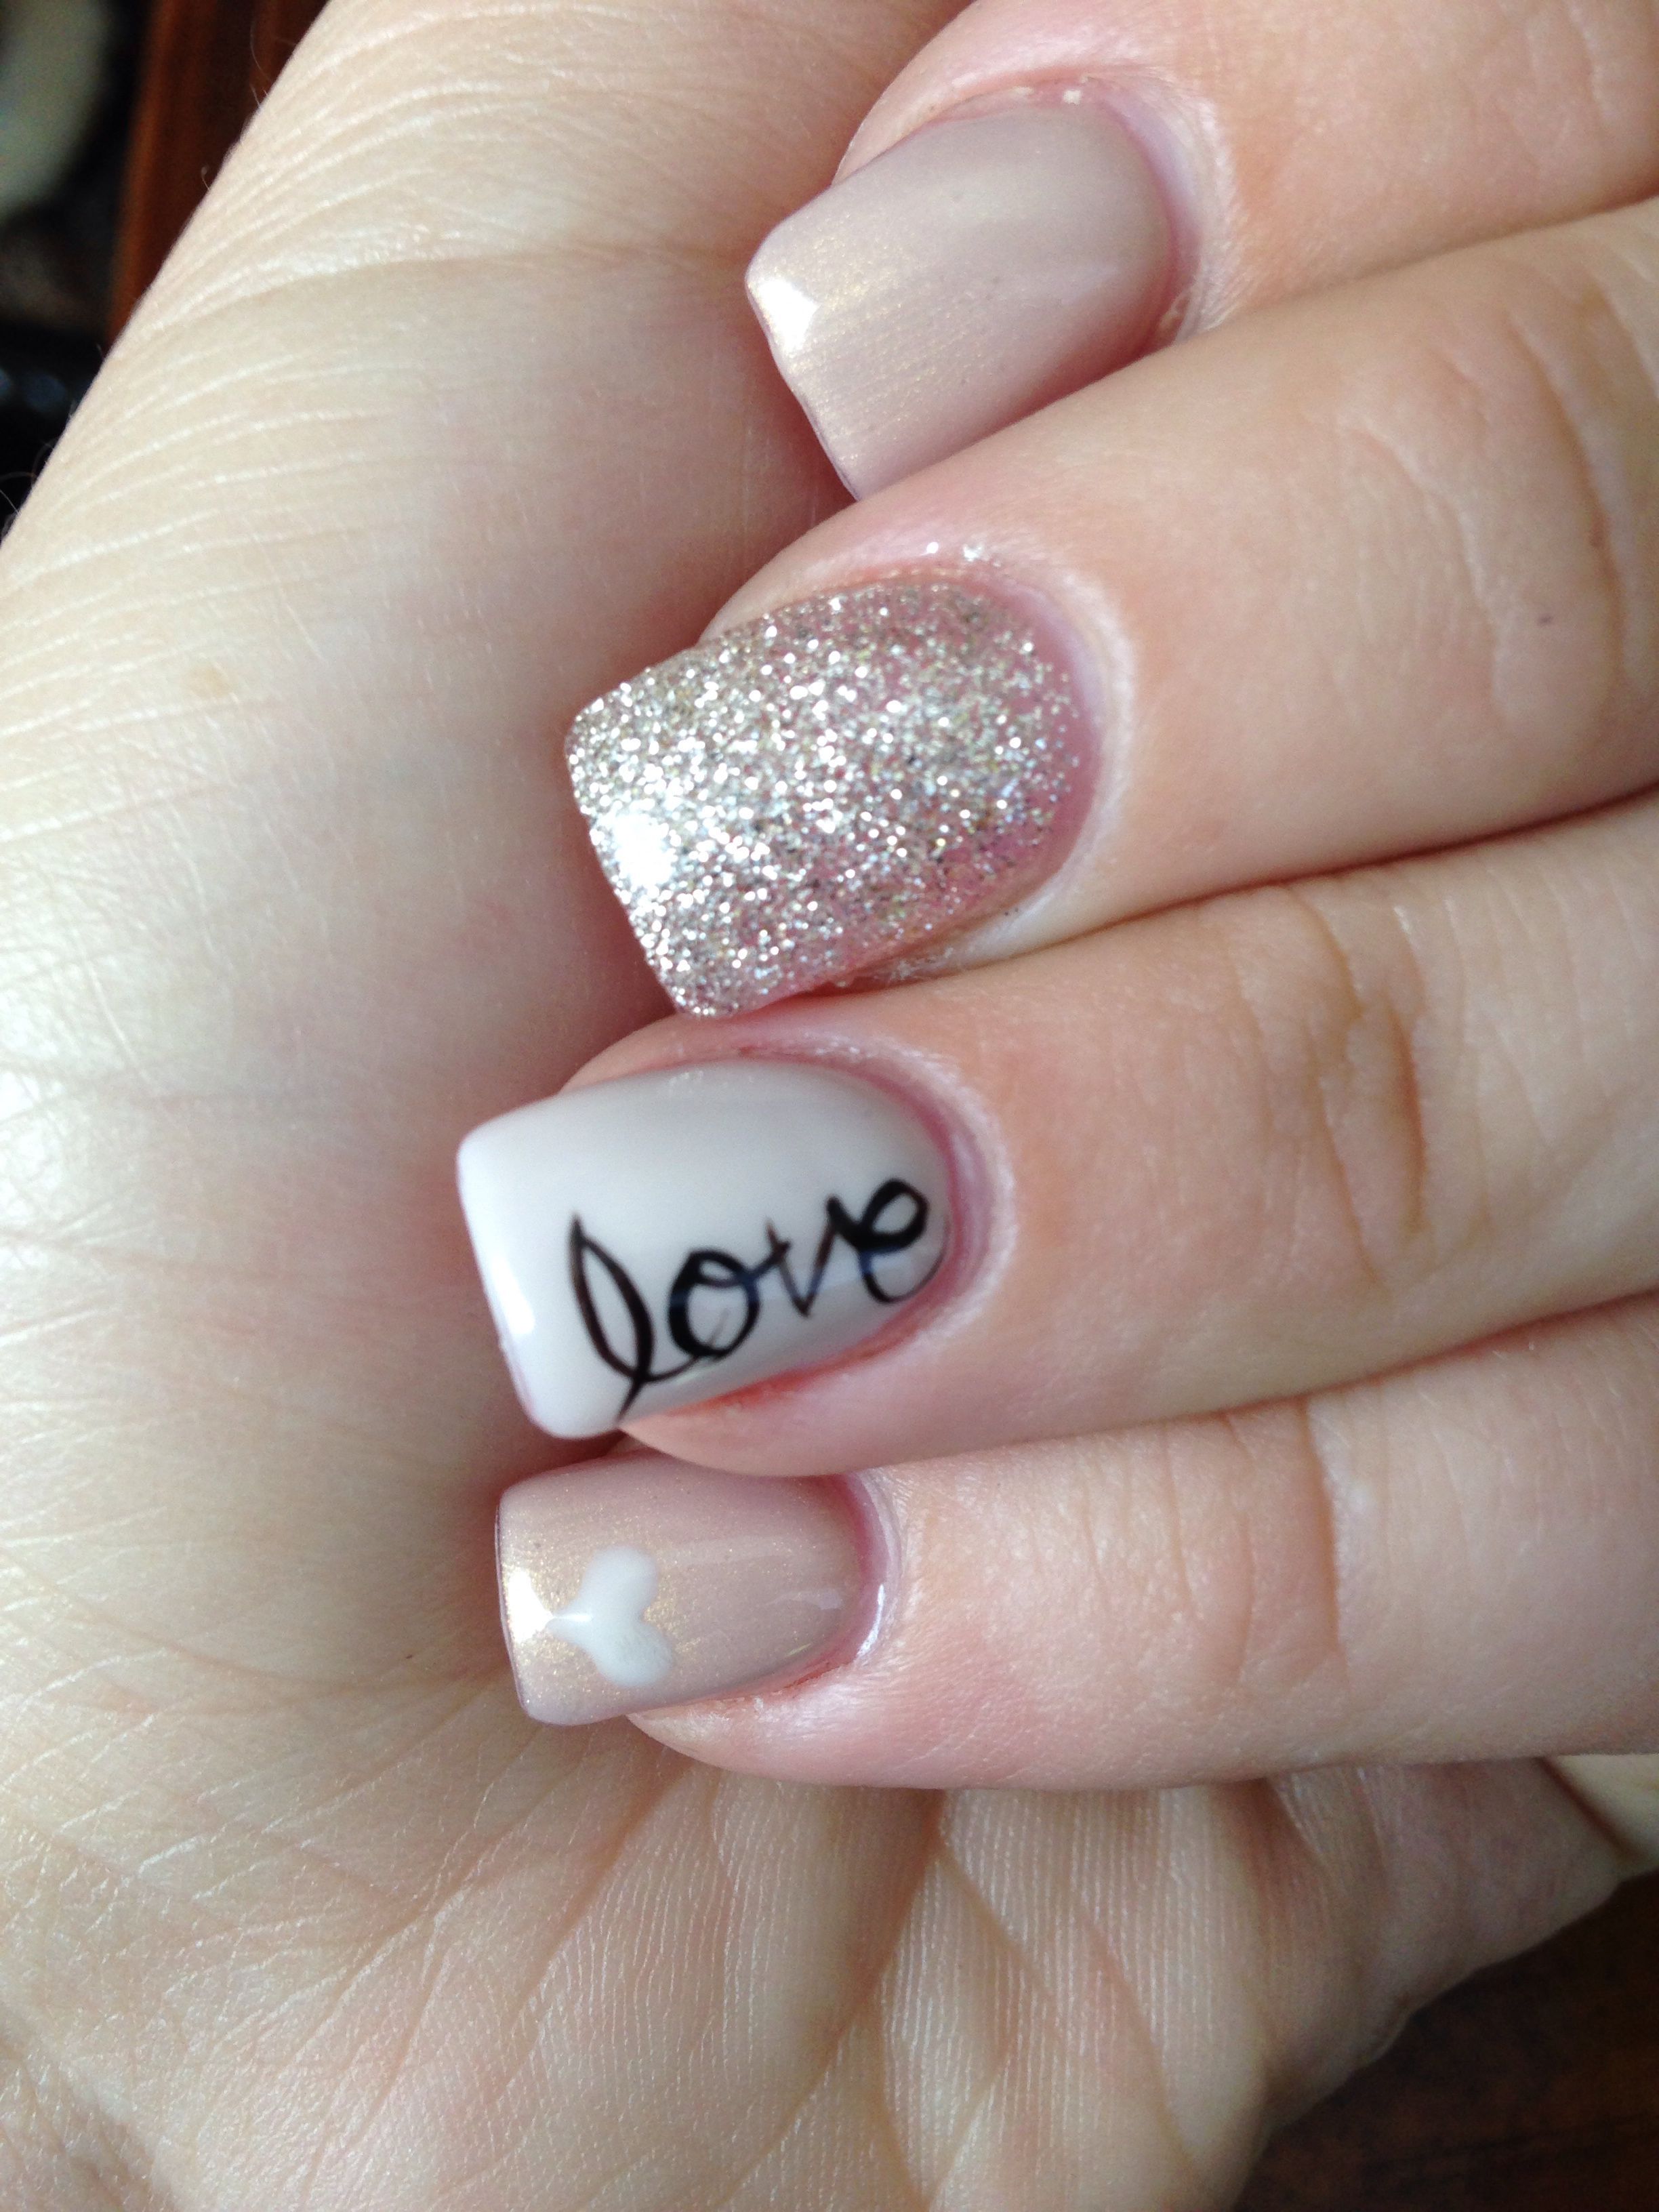 I never thought of writing on nail art – so pretty! Perfect for a wedding.